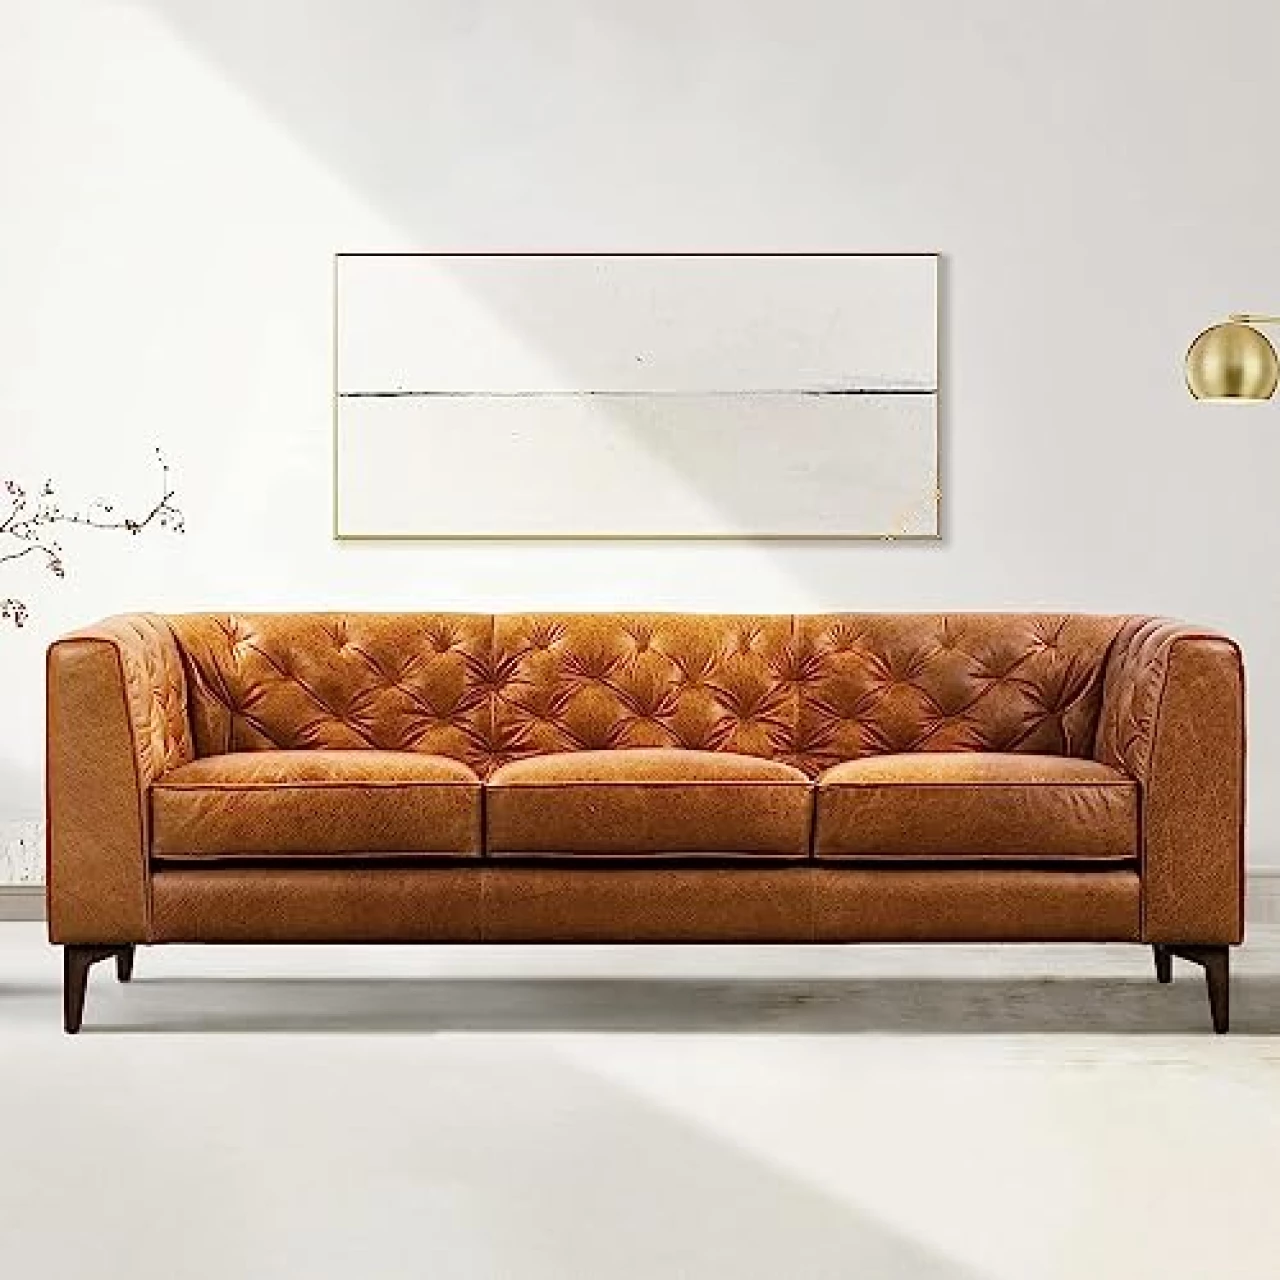 Poly &amp; BARK Essex Leather Couch - 89-Inch Leather Sofa with Tufted Back - Full Grain Leather Couch with Feather-Down Topper On Seating Surfaces - Vintage Pure-Aniline Italian Leather - Cognac Tan